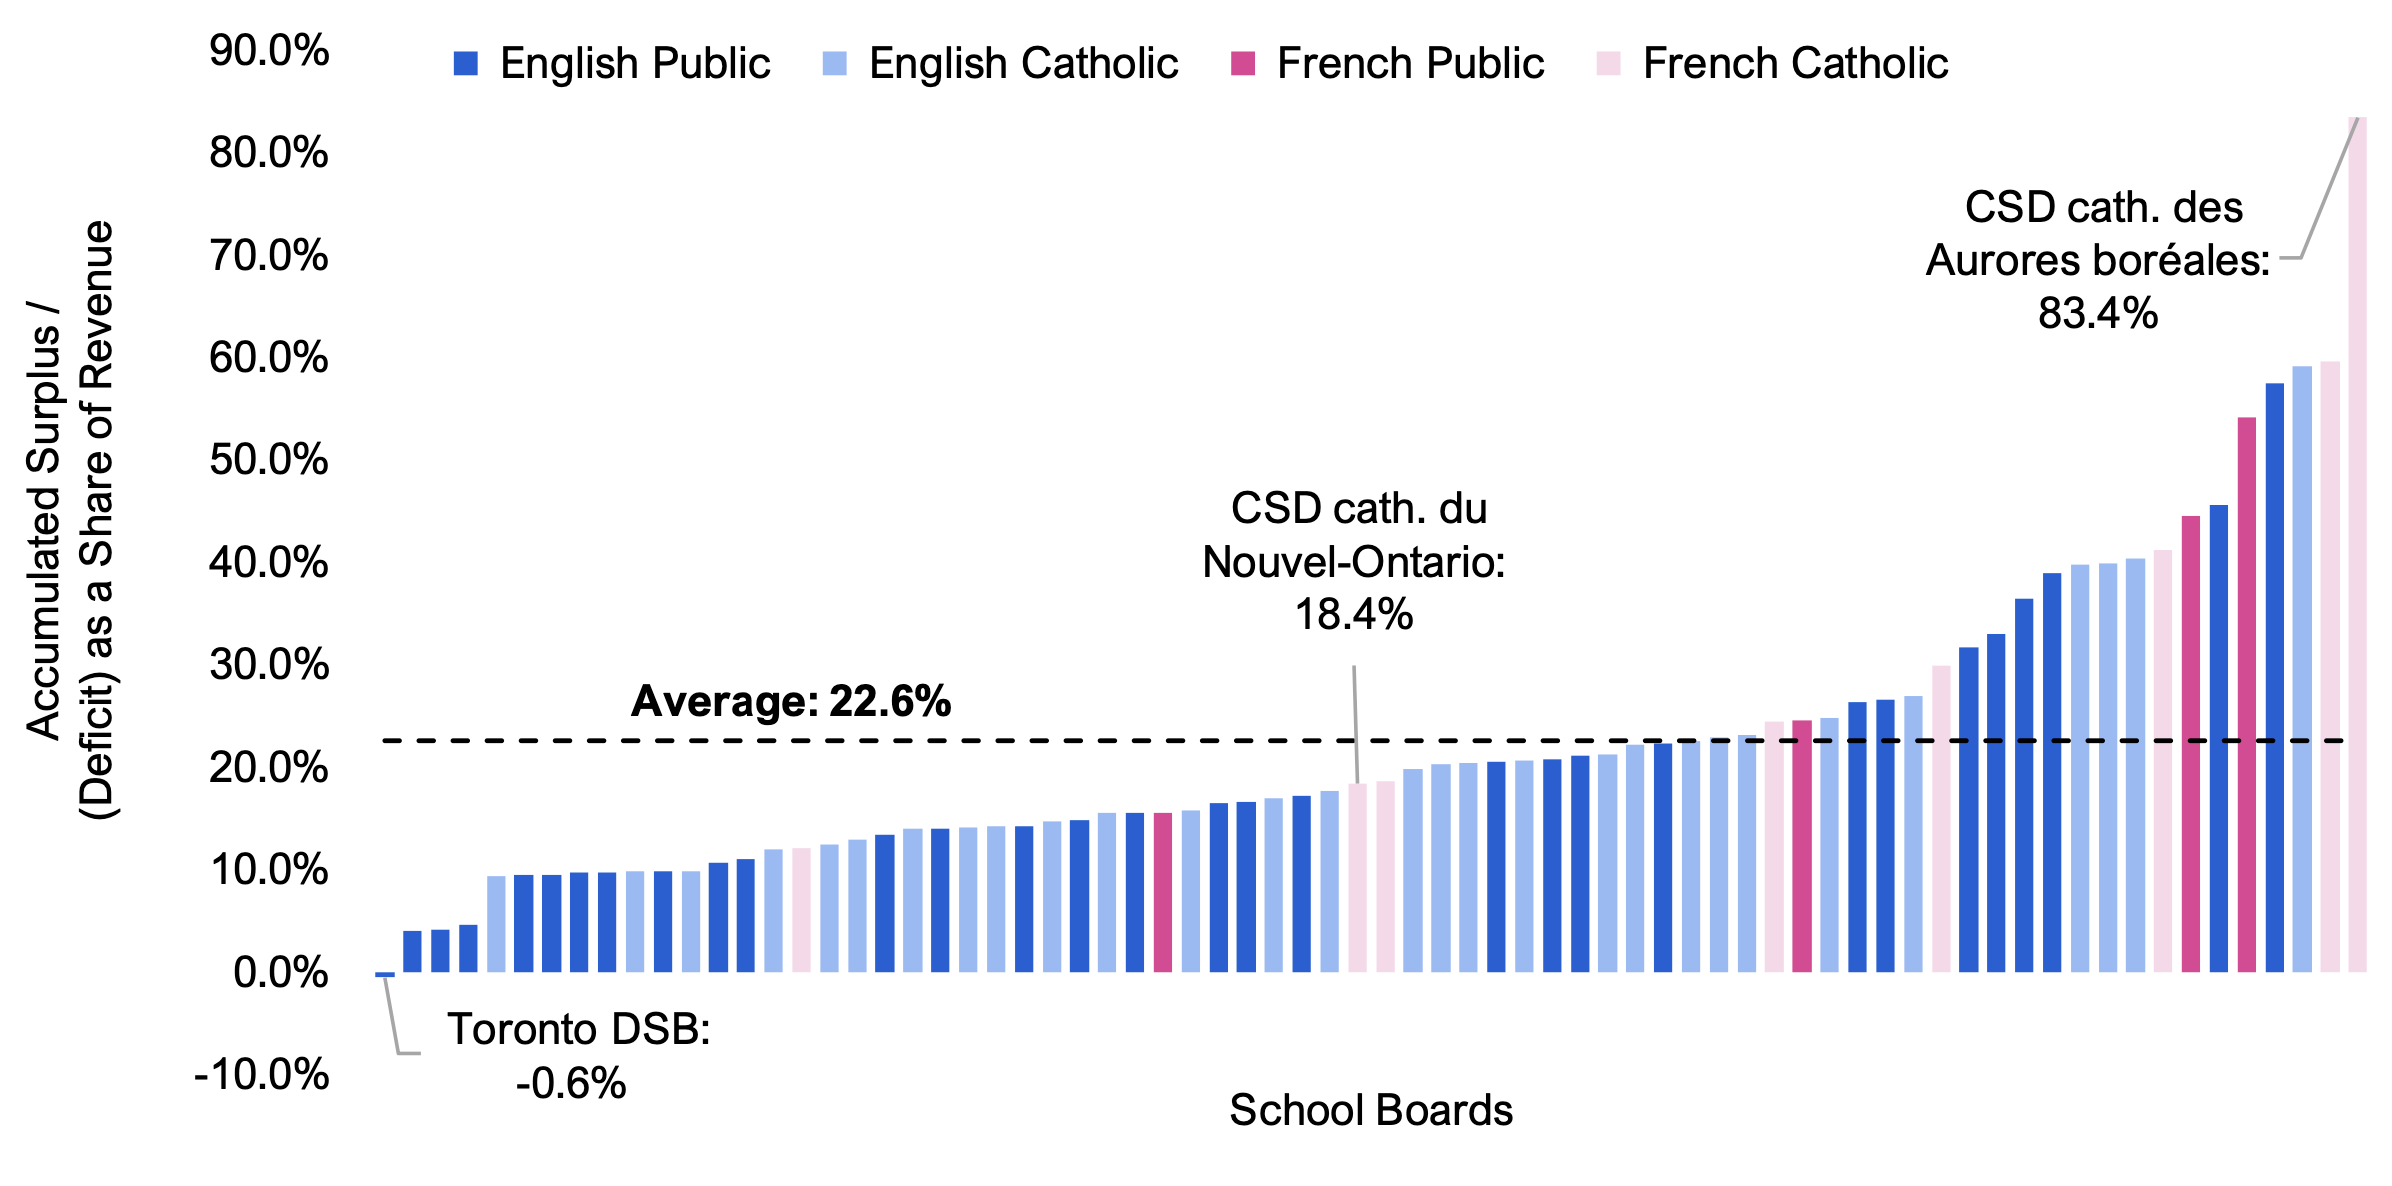 Figure 7.3 shows school boards’ accumulated surplus / (deficit) as a share of revenue by school board, broken down by school system. The values range from a low of -0.6 per cent for the Toronto DSB to a high of 83.4 per cent for the CSD catholique du Nouvel-Ontario, with an overall average of 22.6 per cent.